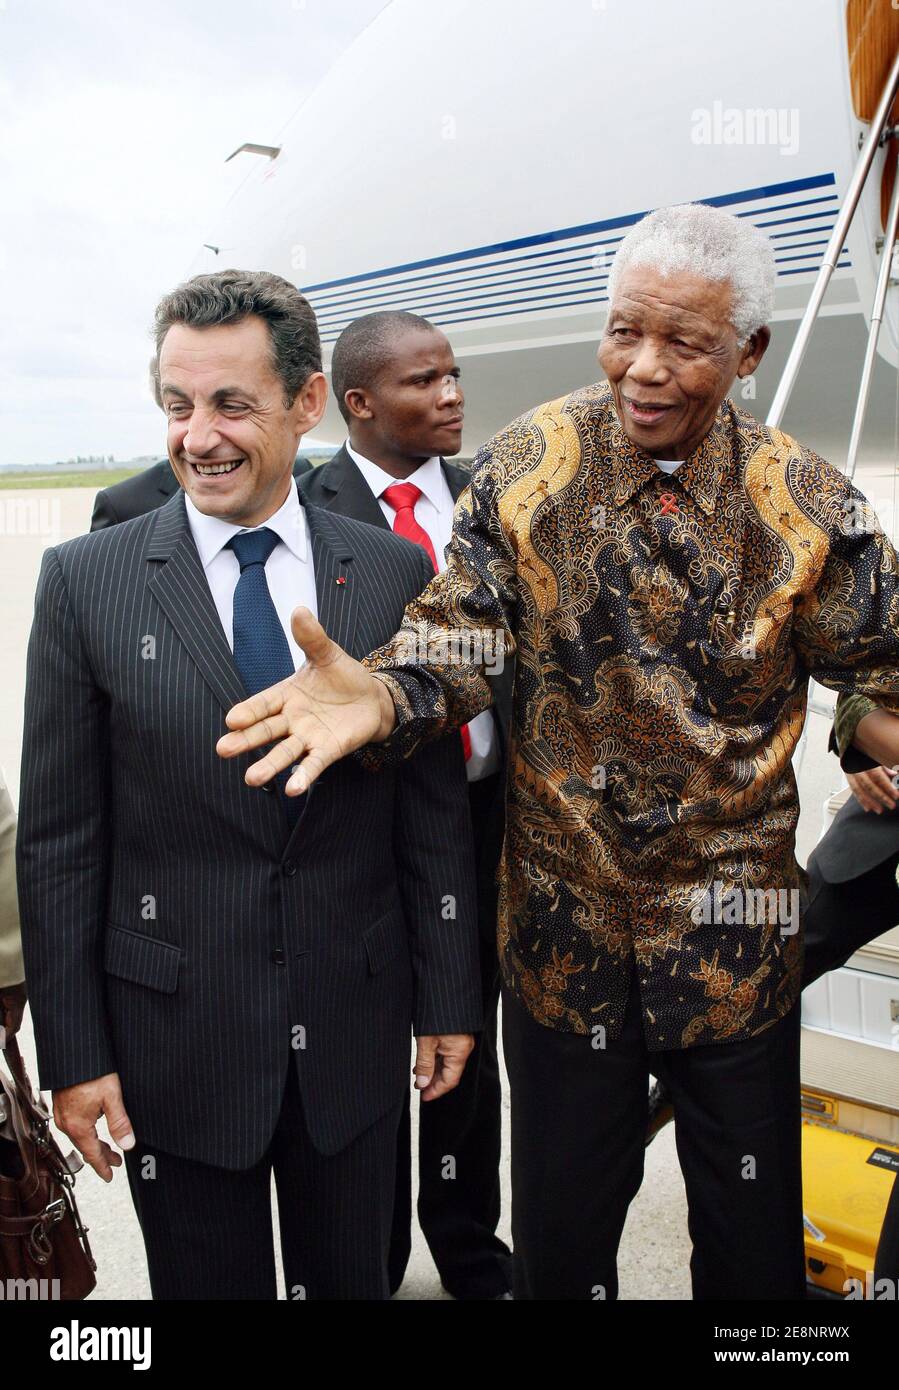 President Nicolas Sarkozy (l) welcomes former South African president Nelson Mandela and his wife upon their arrival at Orly airport, near Paris, France on September 3, 2007. The 89-year-old Nobel Peace Prize winner Mandela spent 27 years in prison before being freed in 1990, going on to become South Africa's first black leader in 1994 after the fall of apartheid. He received last week a hero's welcome in London, where a statue of him was unveiled opposite the Houses of Parliament. Photo by Thomas Coex/Pool/ABACAPRESS.COM Stock Photo